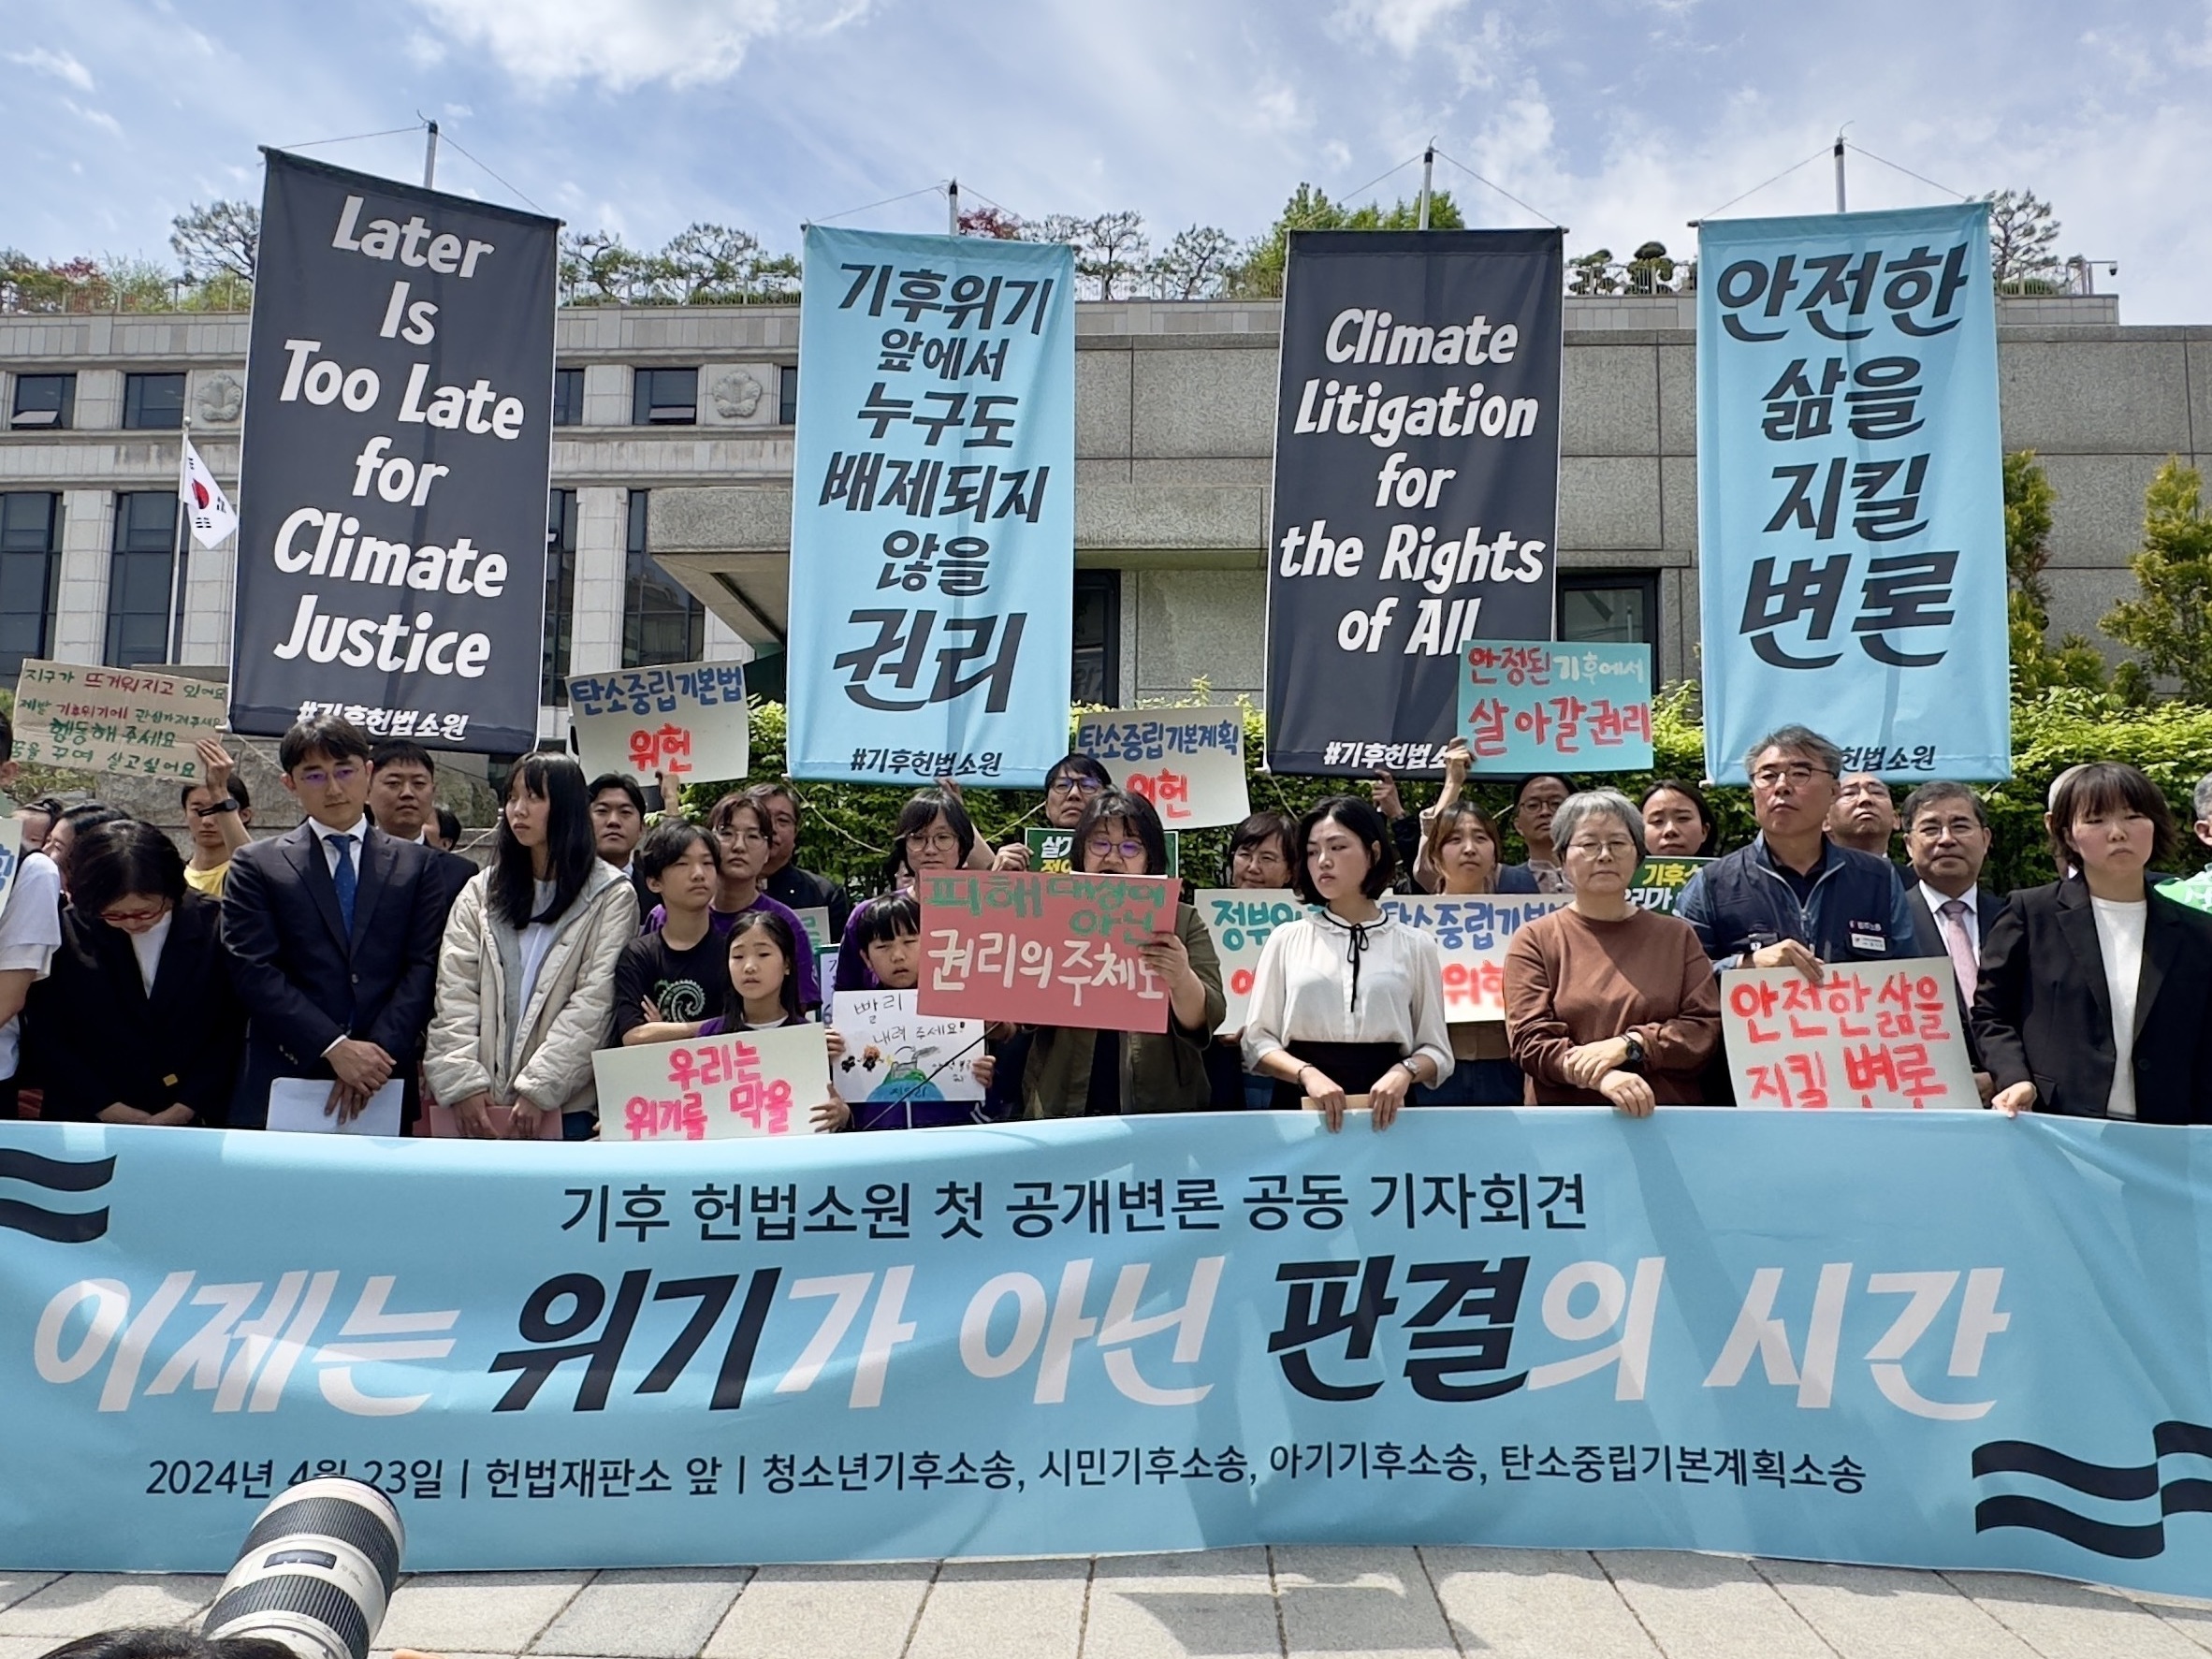 South Koreans sue government over climate change, saying policy violates human rights